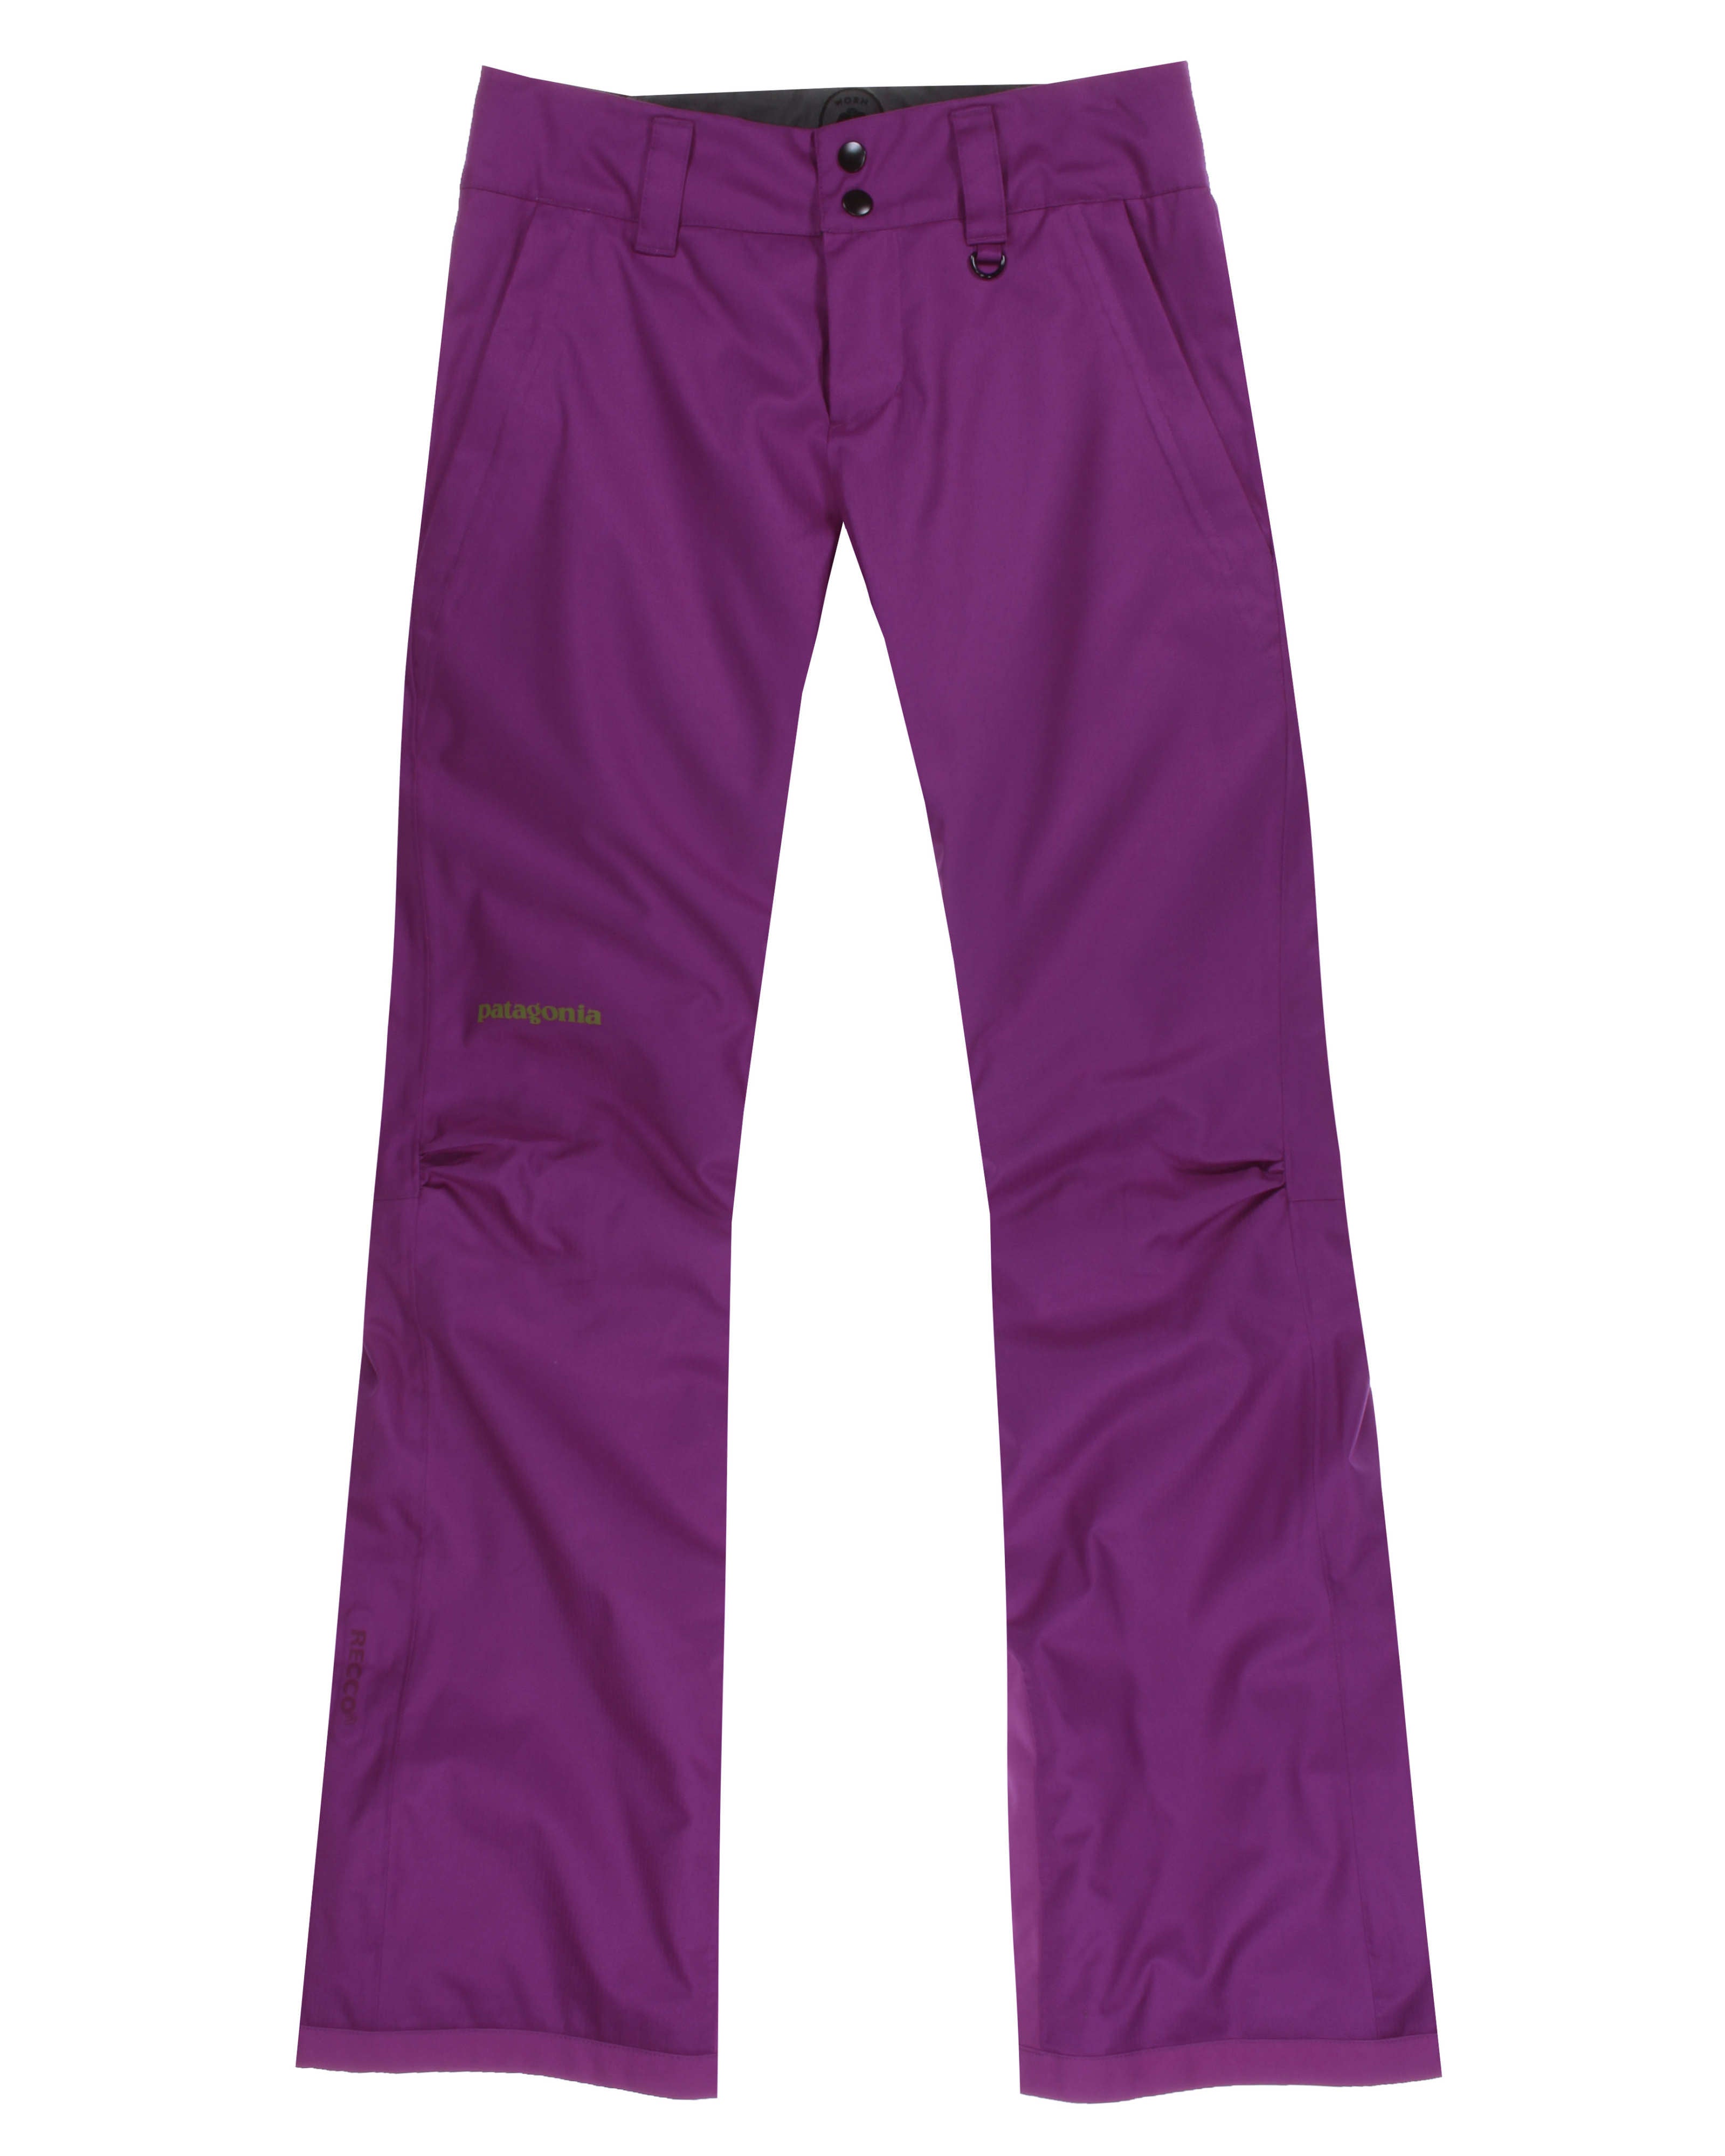 W's Insulated Snowbelle Pants - Regular